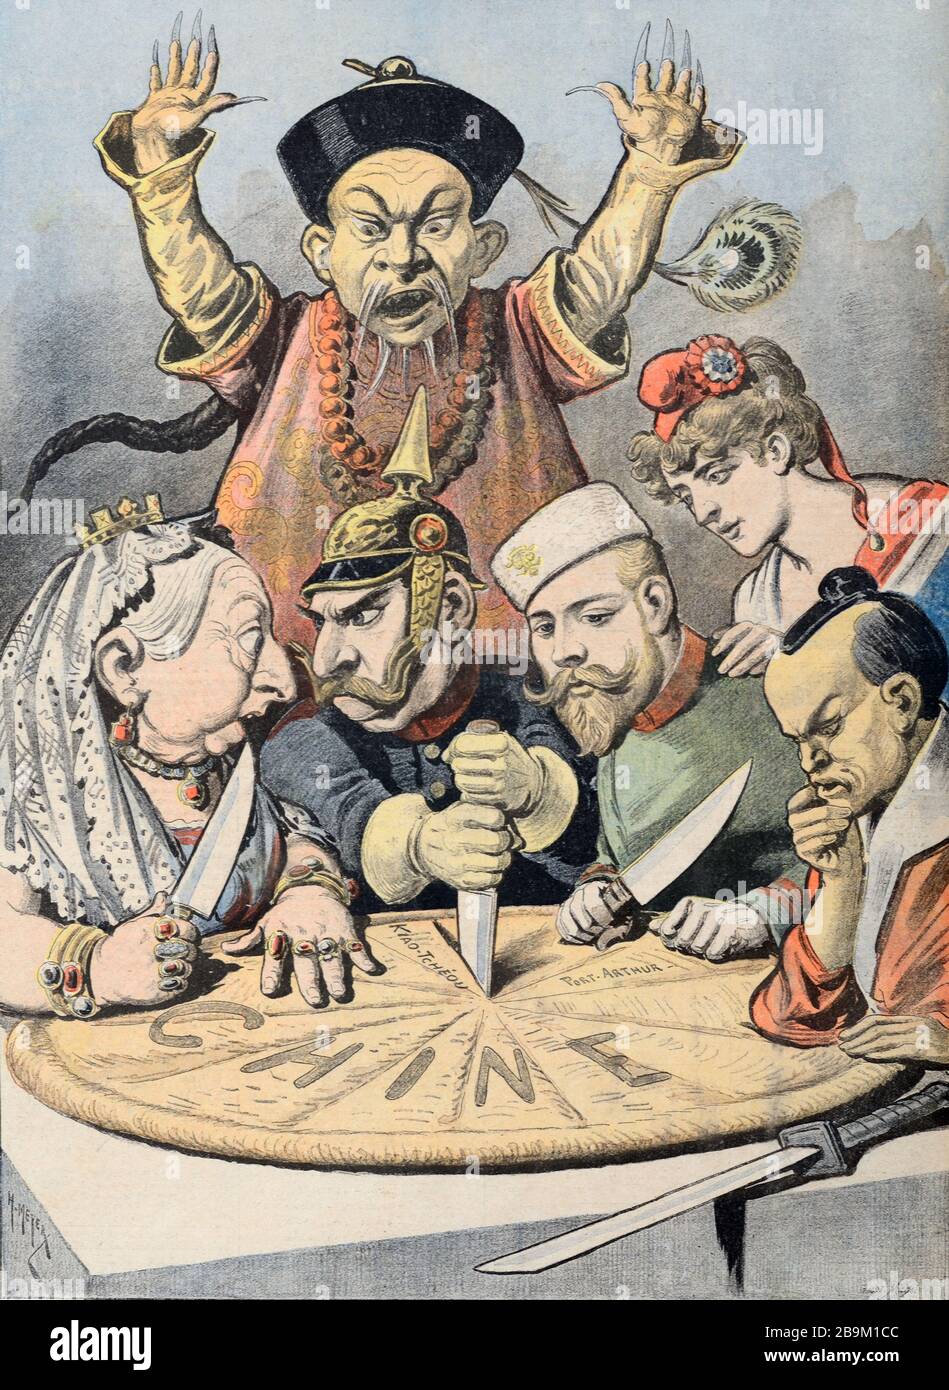 Vintage Illustration or Caricature of European Powers, Great Britain, Germany, Russia & France, Attempting to Divide up China during The Great Game 1898 Stock Photo